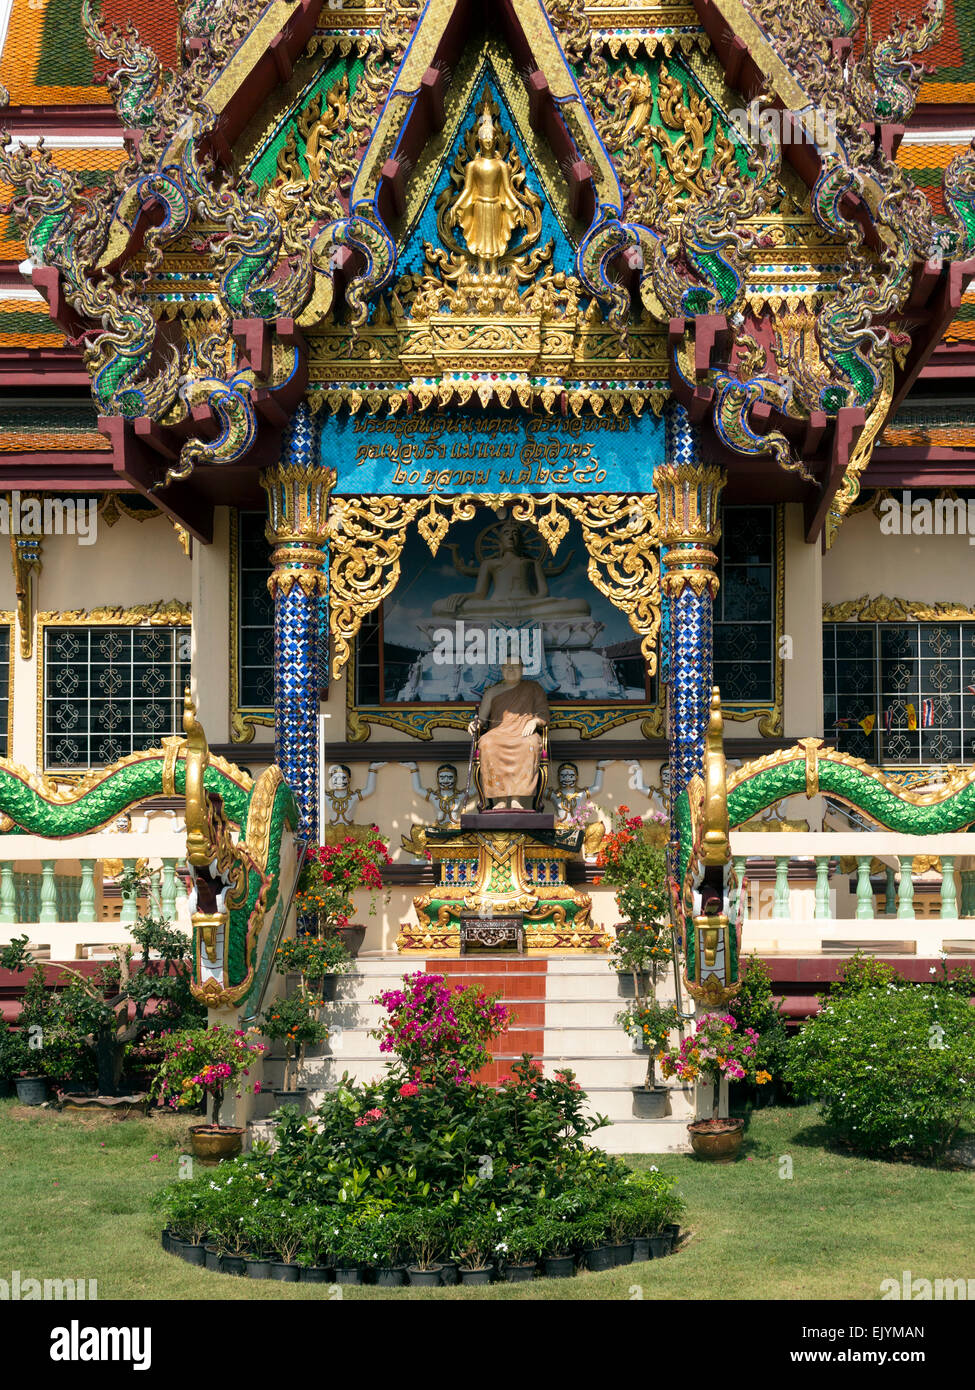 Central facade of one of the Wat Plai Laem Temples on Koh Samui Stock Photo